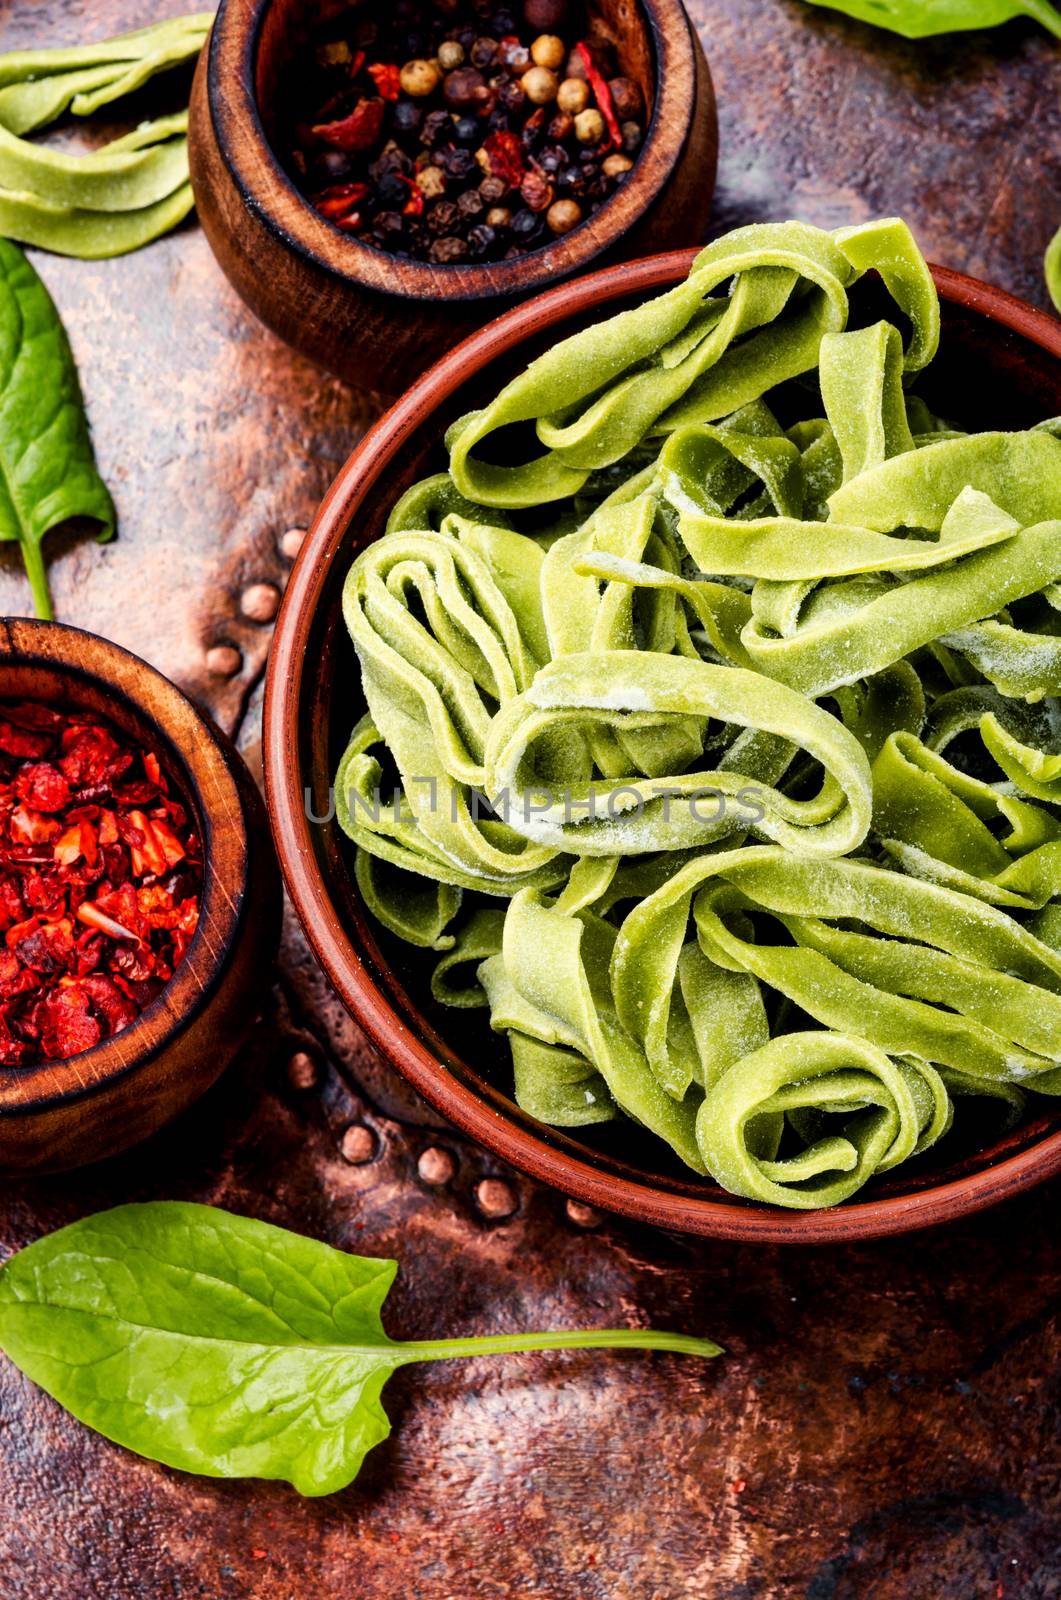 Spinach noodles.Handmade noodles and ingredients.Fresh uncooked noodles